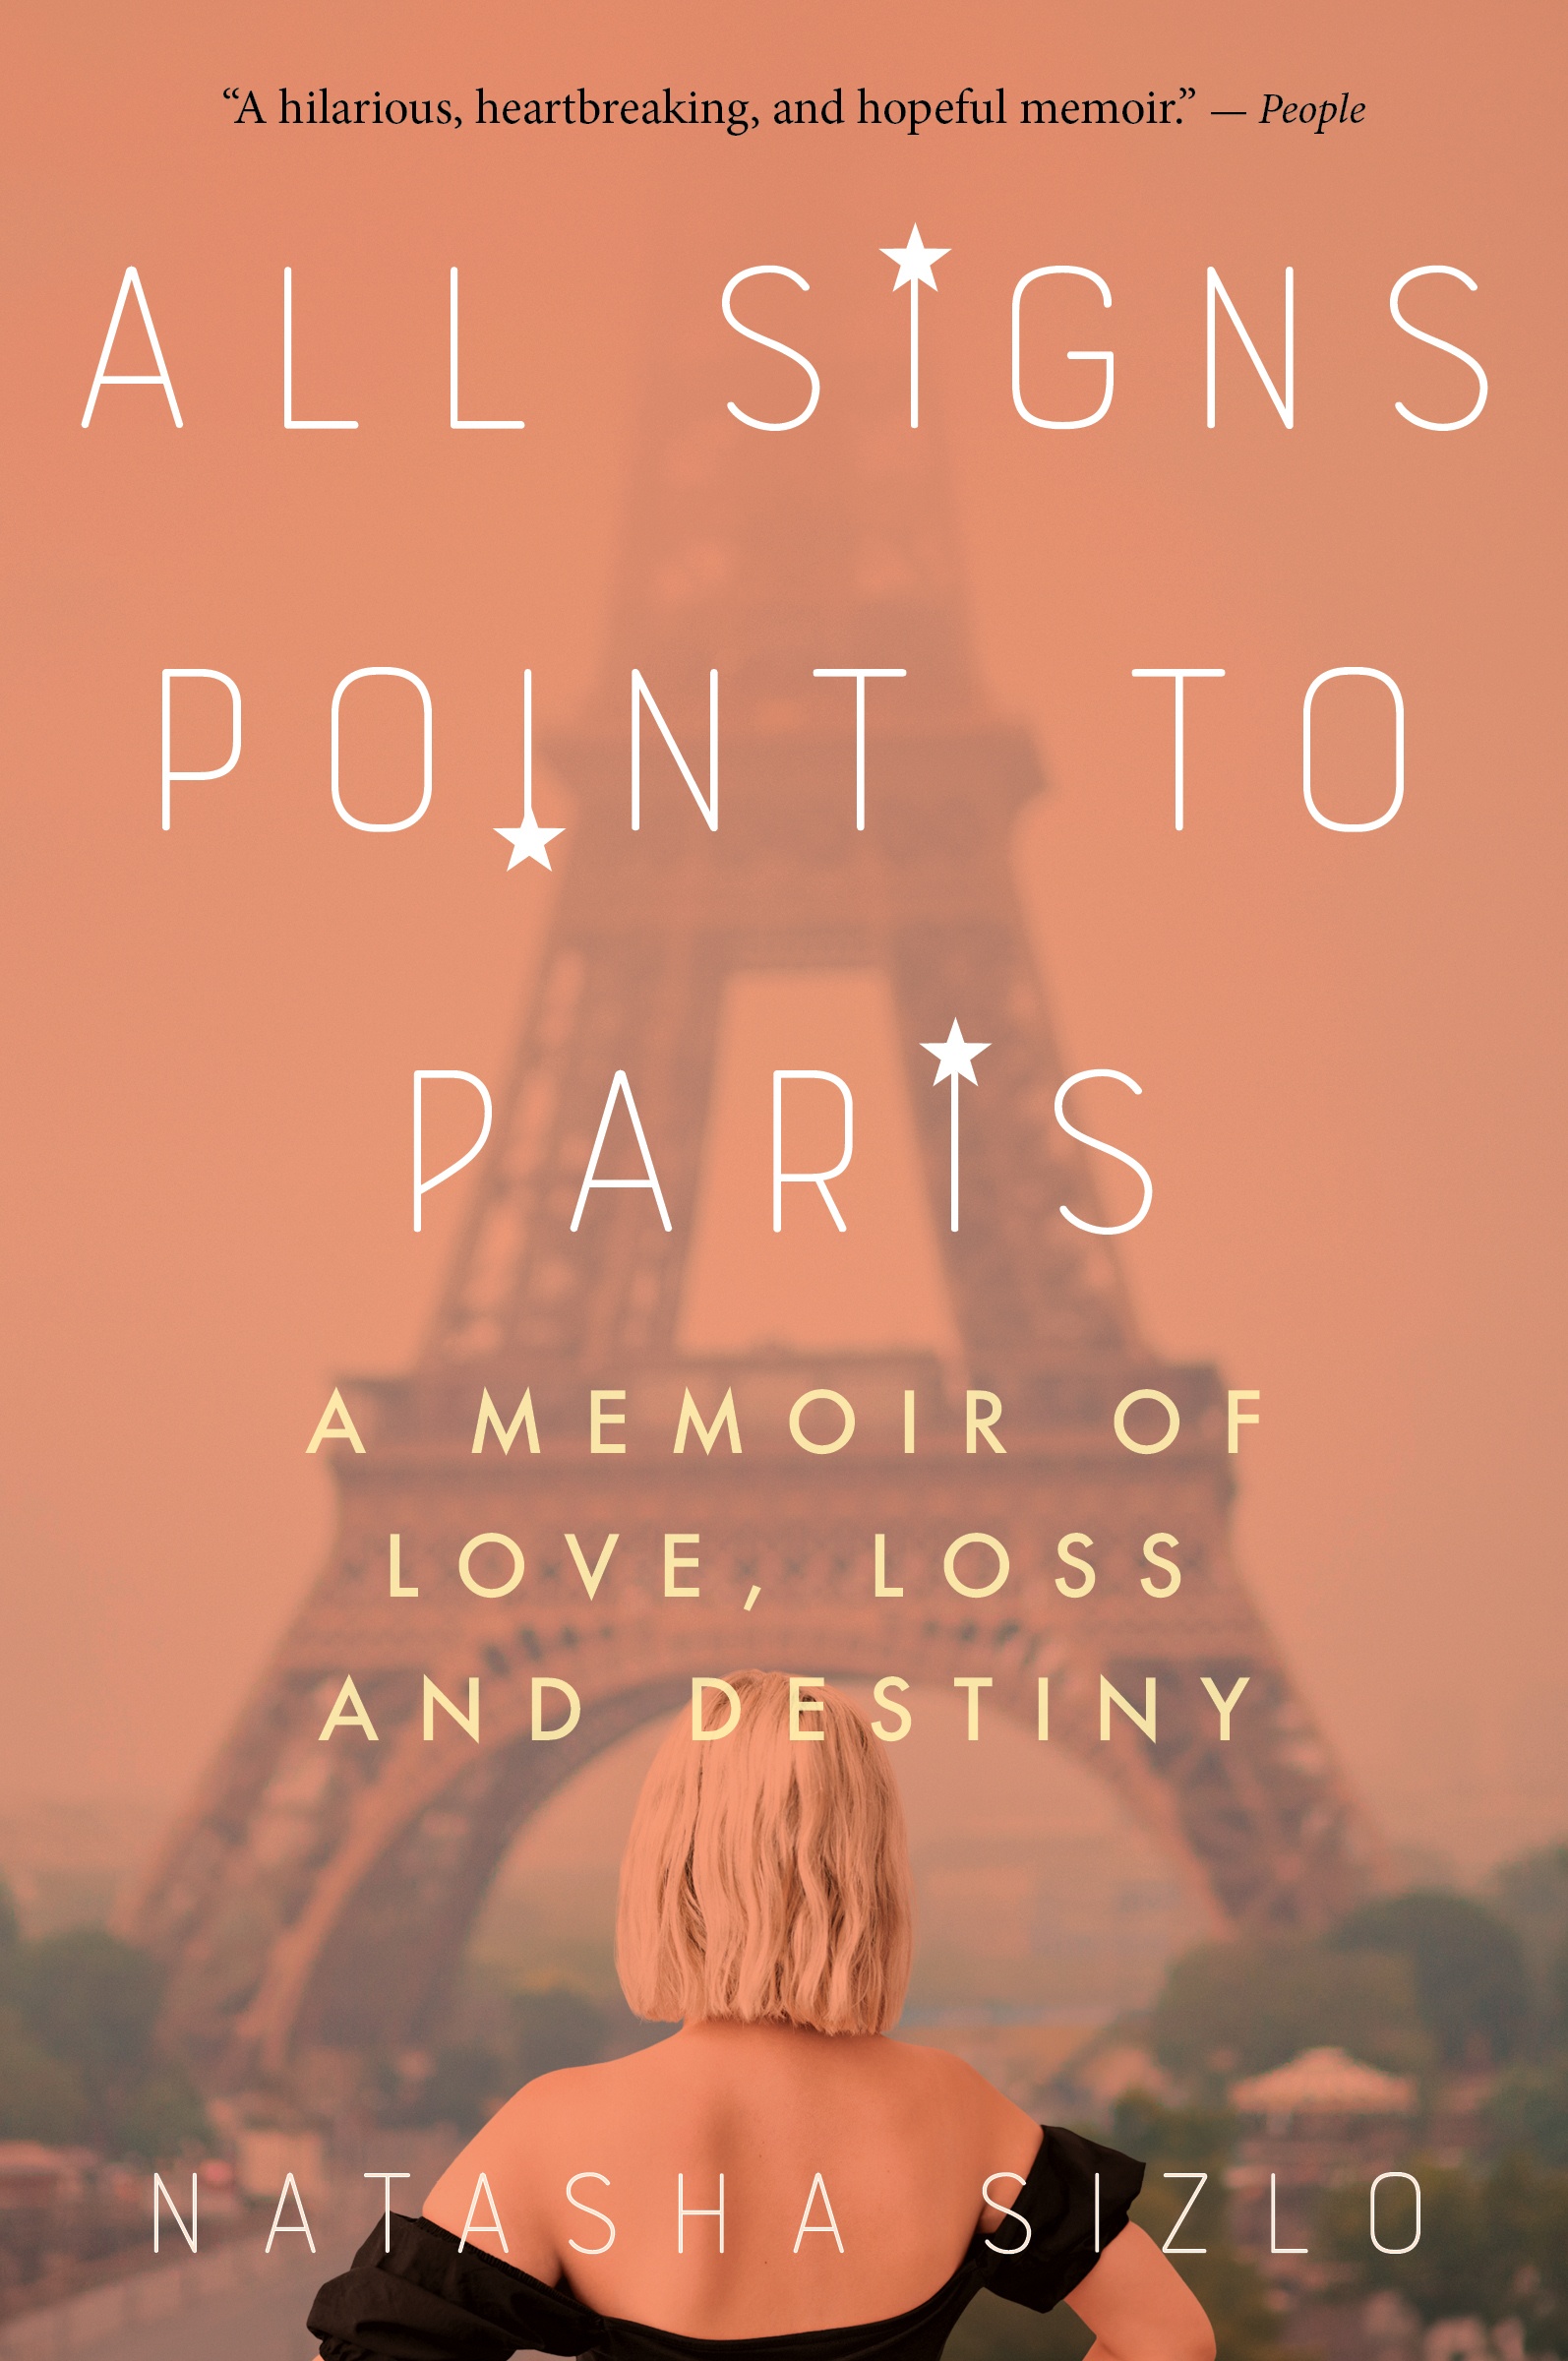 All Signs Point to Paris A Memoir of Love, Loss, and Destiny cover image